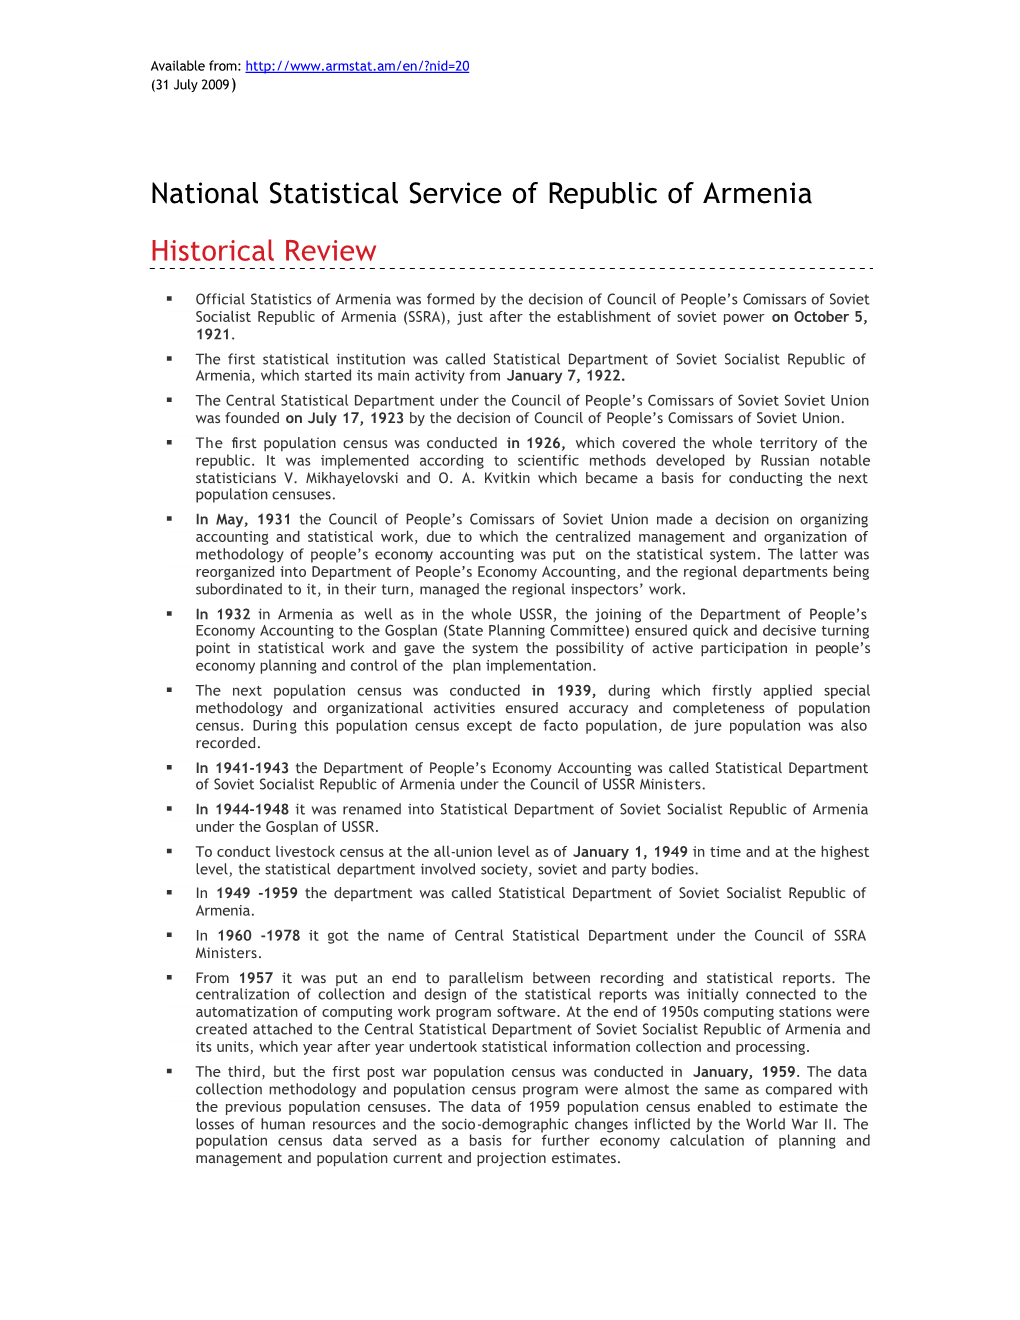 National Statistical Service of Republic of Armenia Historical Review